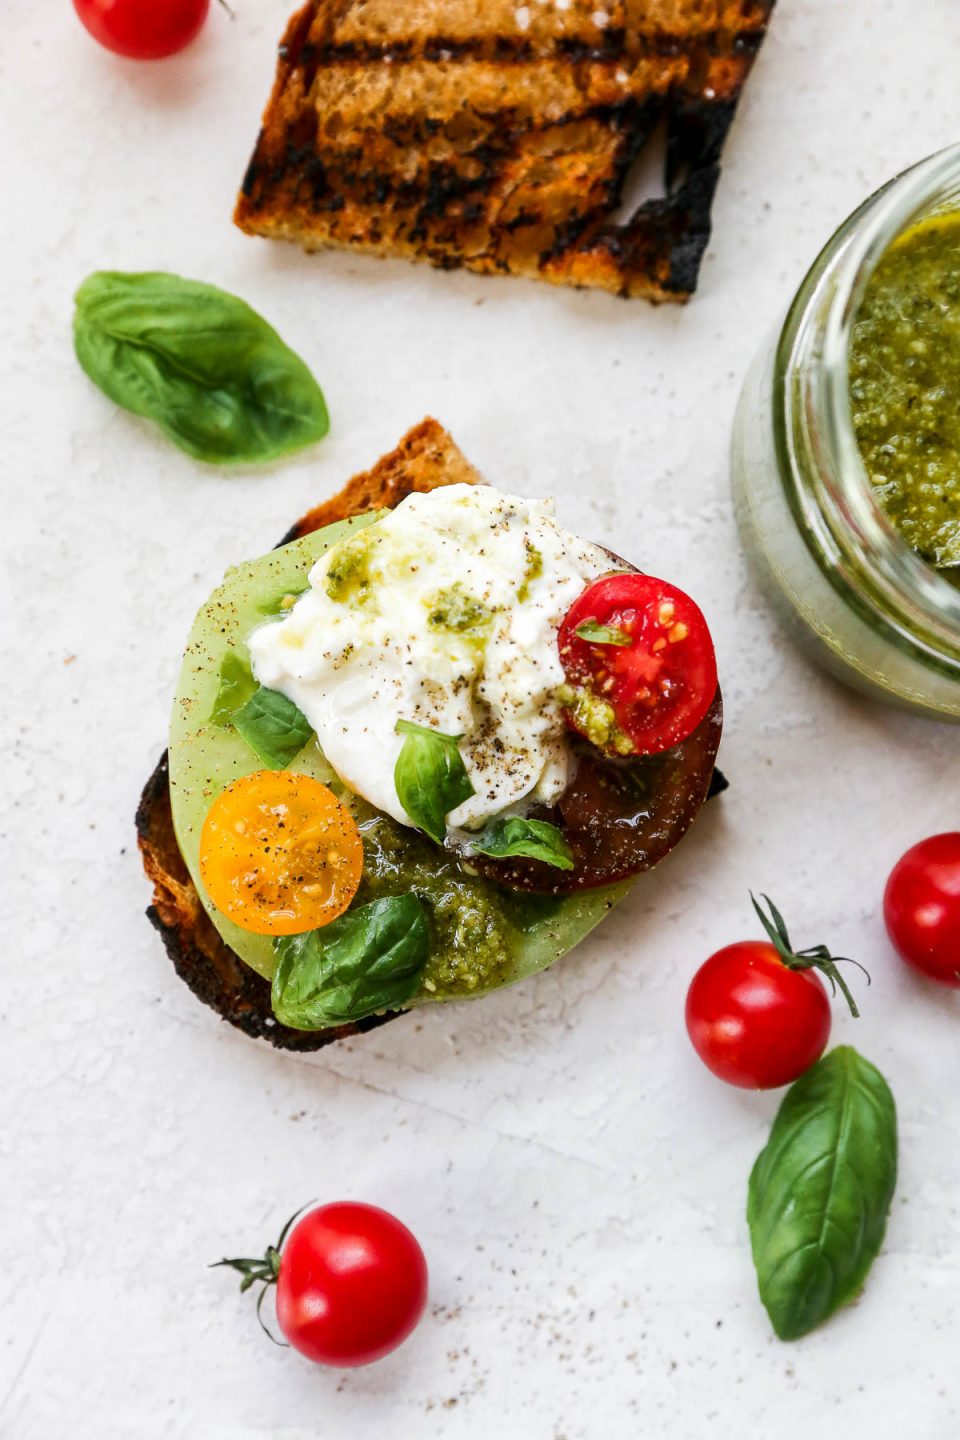 Burrata Caprese Salad served on a piece of grilled bread. The bread sits atop a neutral background, surrounded by whole cherry tomatoes, fresh bail leaves & a jar of basil pesto sauce.